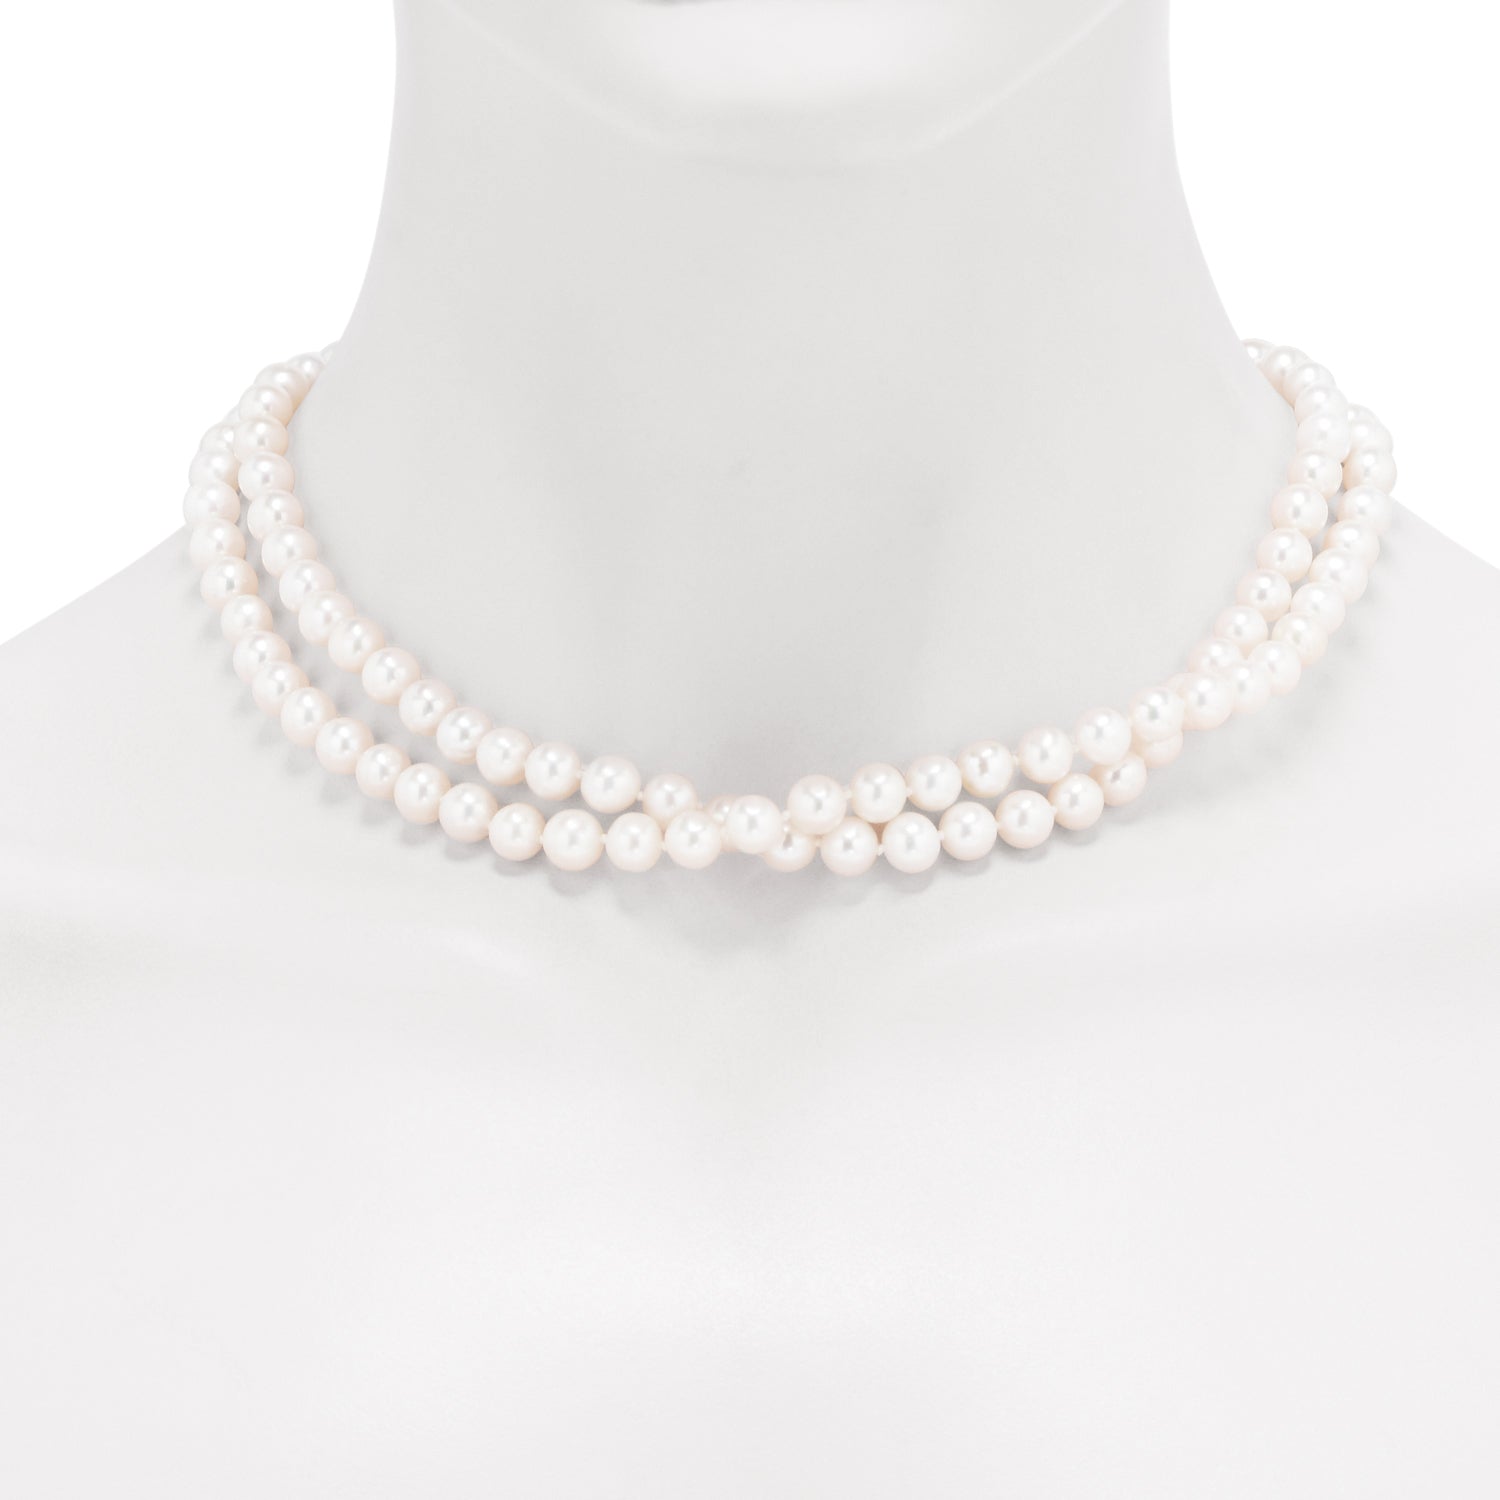 Cultured Freshwater Double Pearl Strand Necklace in Sterling Silver with Cubic Zirconia (7-8mm pearls)